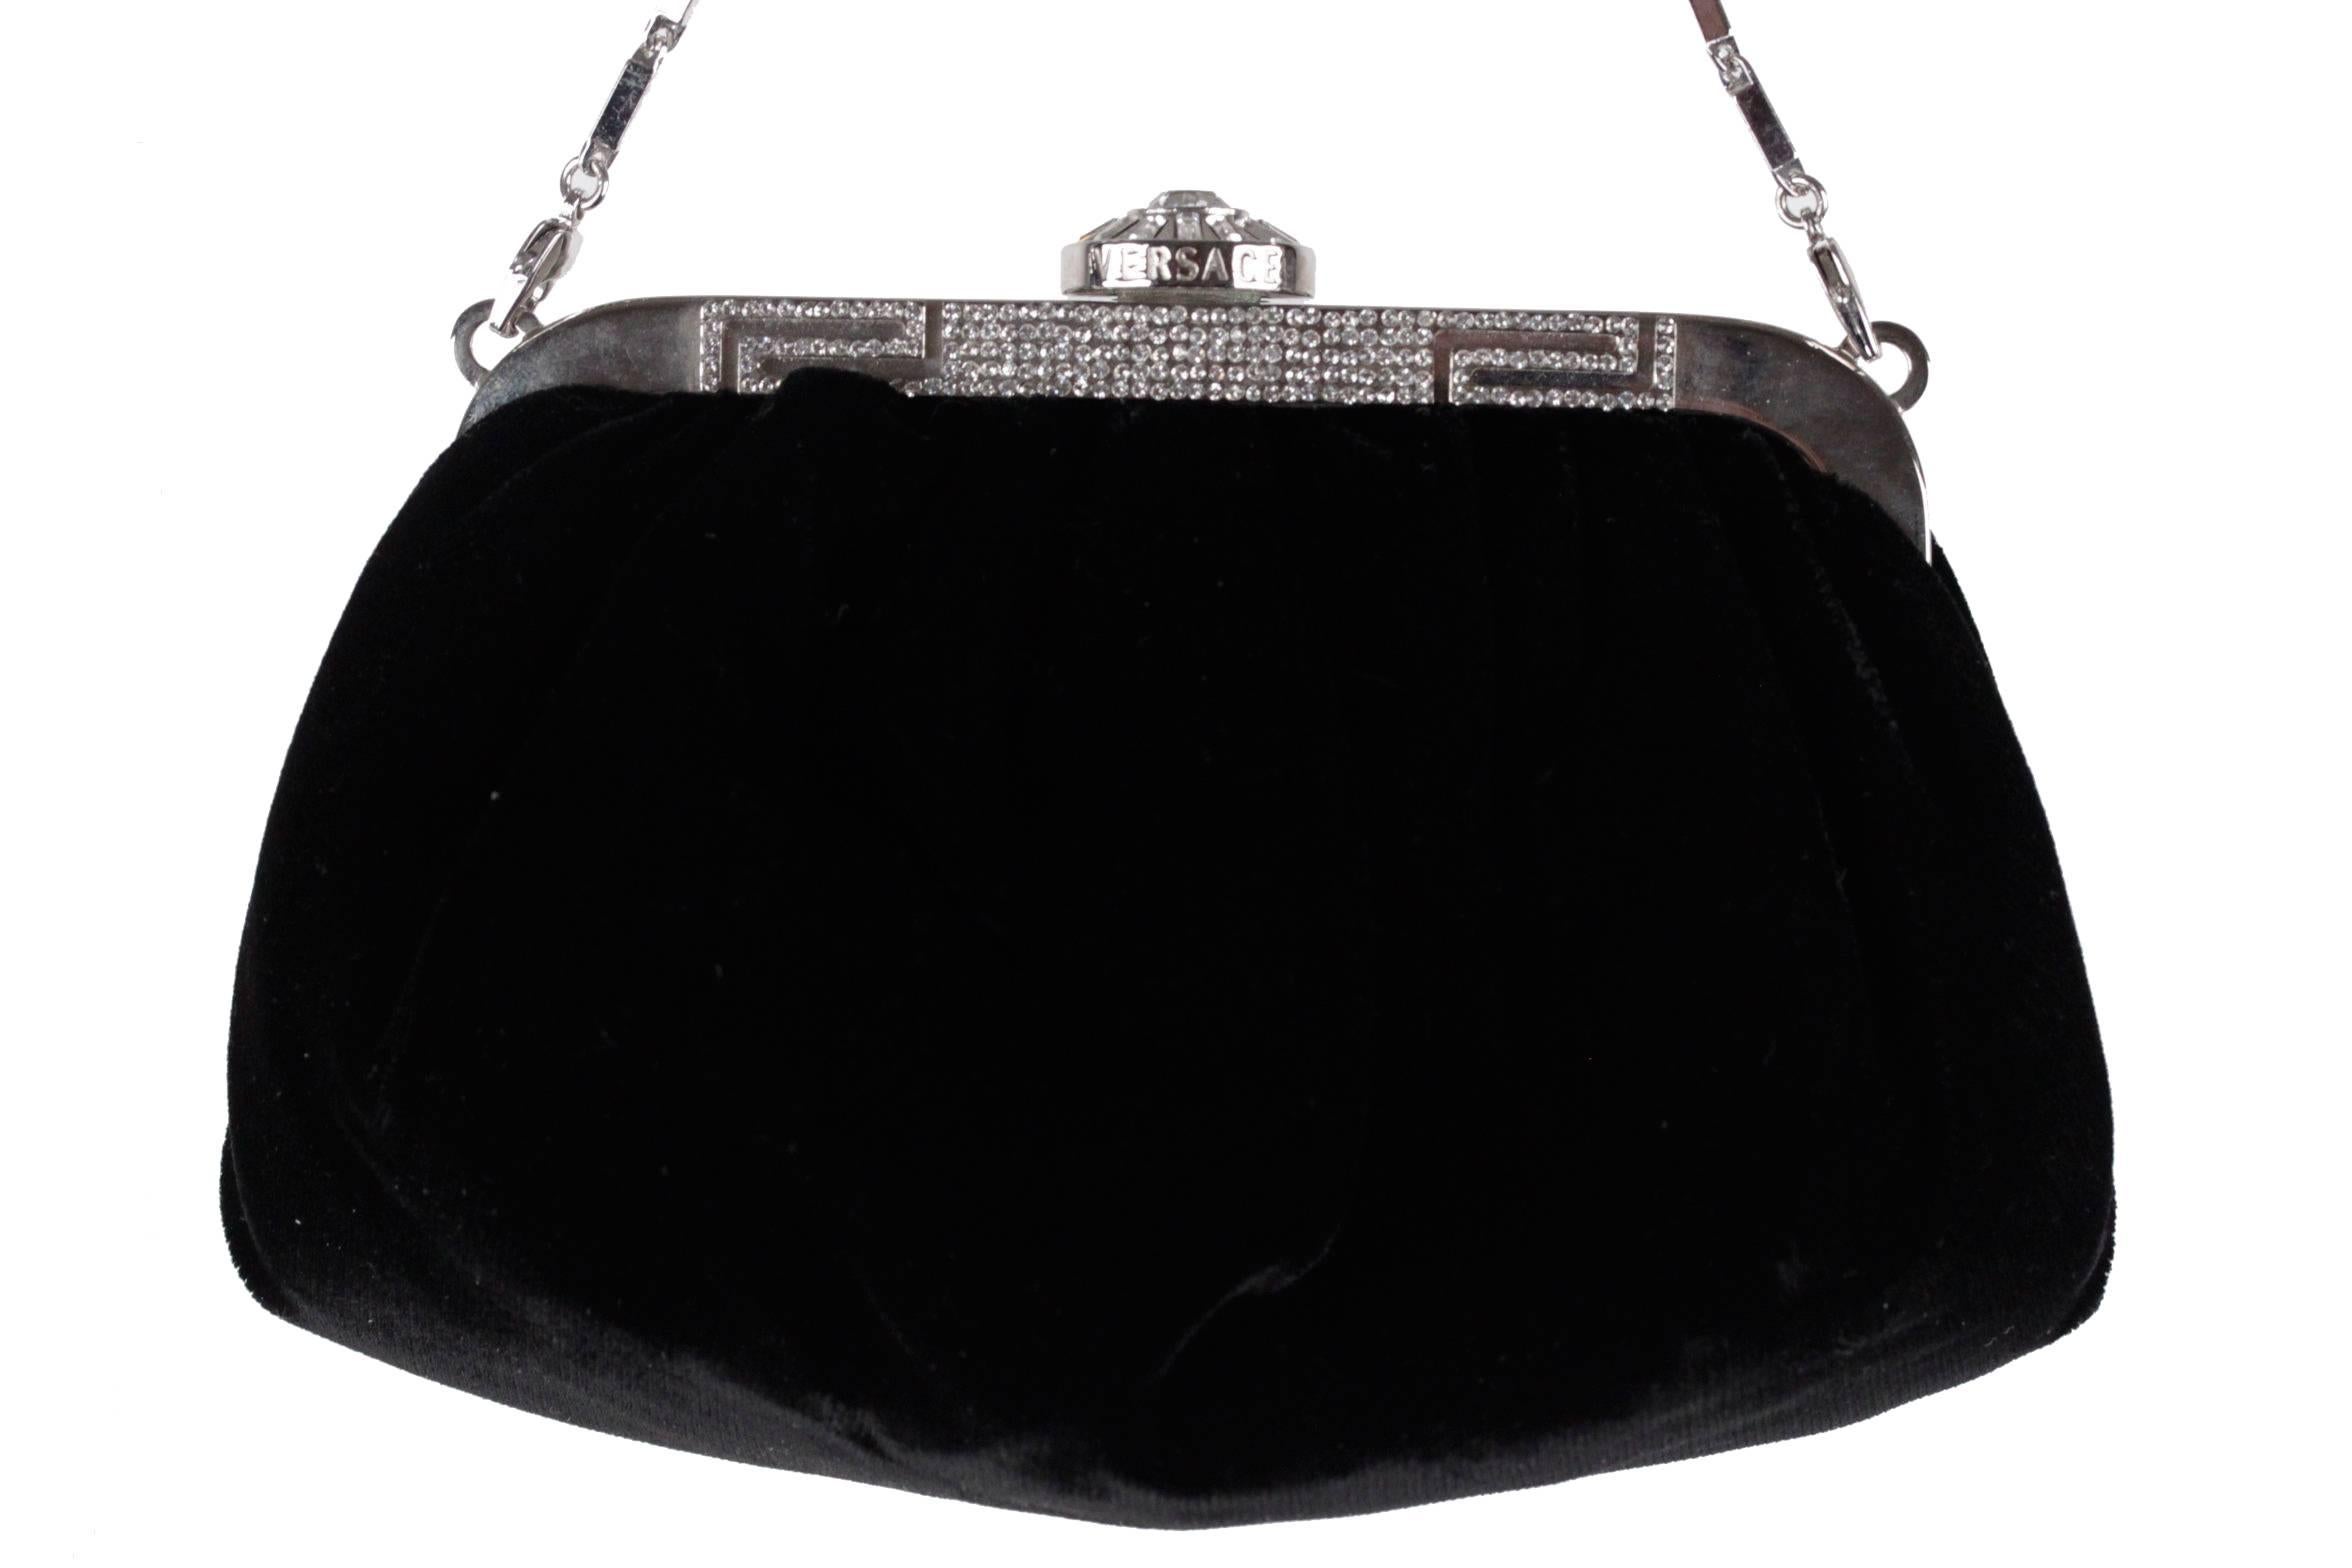 - VERSACE Black evening bag

- Silver metal frame embellished with rhinestones
- Clasp closure on top with rhinestones detailing
- Removable chain
- The purse is lined in a satin
- Approx. measurements: 3 1/2 x 8 x 4 inches - 8,9 x 20,3 x 10,2